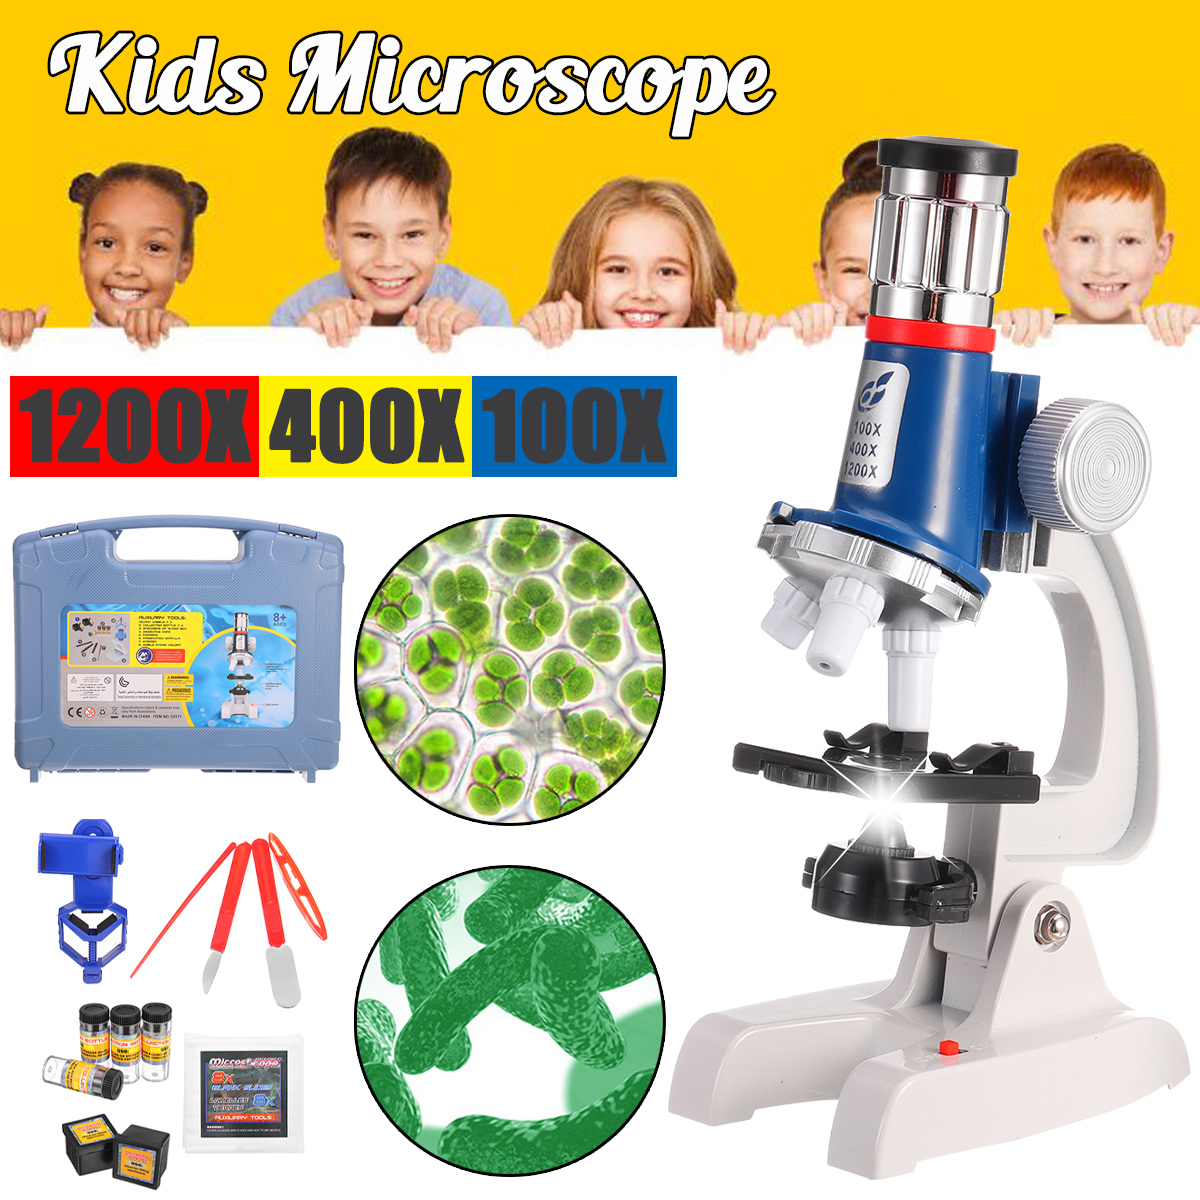 1200X-400X-100X-Magnification-Kids-Microscope-Children-Science-Educational-Toy-1887283-2